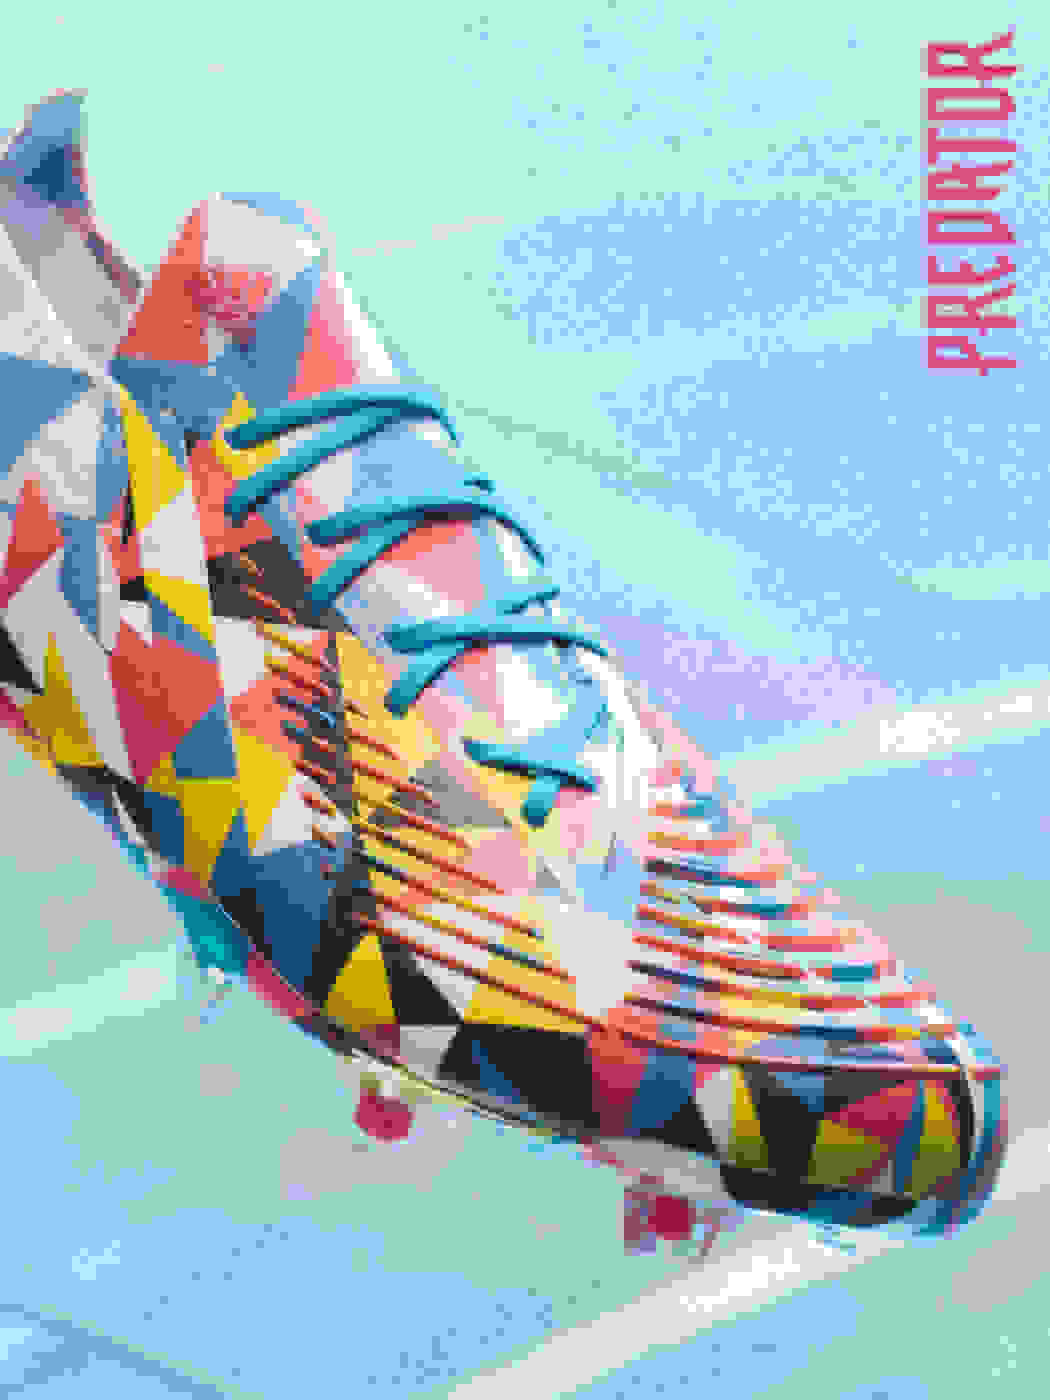 A visual of the laced Predator football boot on a textured background.